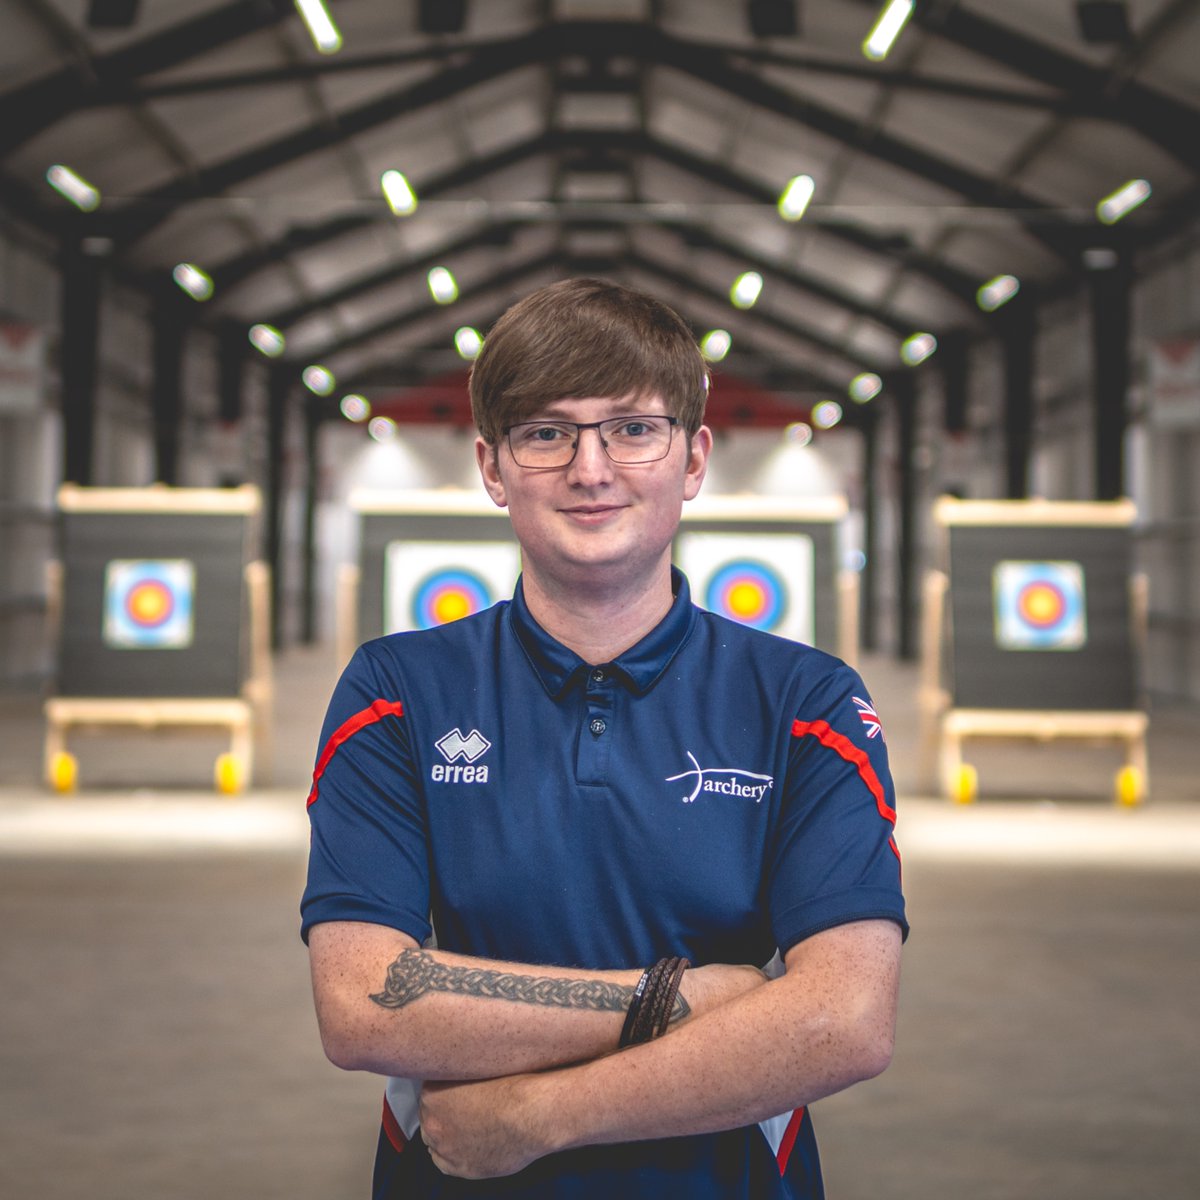 GB have two individual medal matches at the European Para Championships! 🇬🇧 Cameron Radigan - recurve men’s open gold final on Friday 11:15am UK time Victoria Kingstone - women's W1 open bronze final on Thursday at 8am UK time Follow the scores here: ianseo.net/Details.php?to…